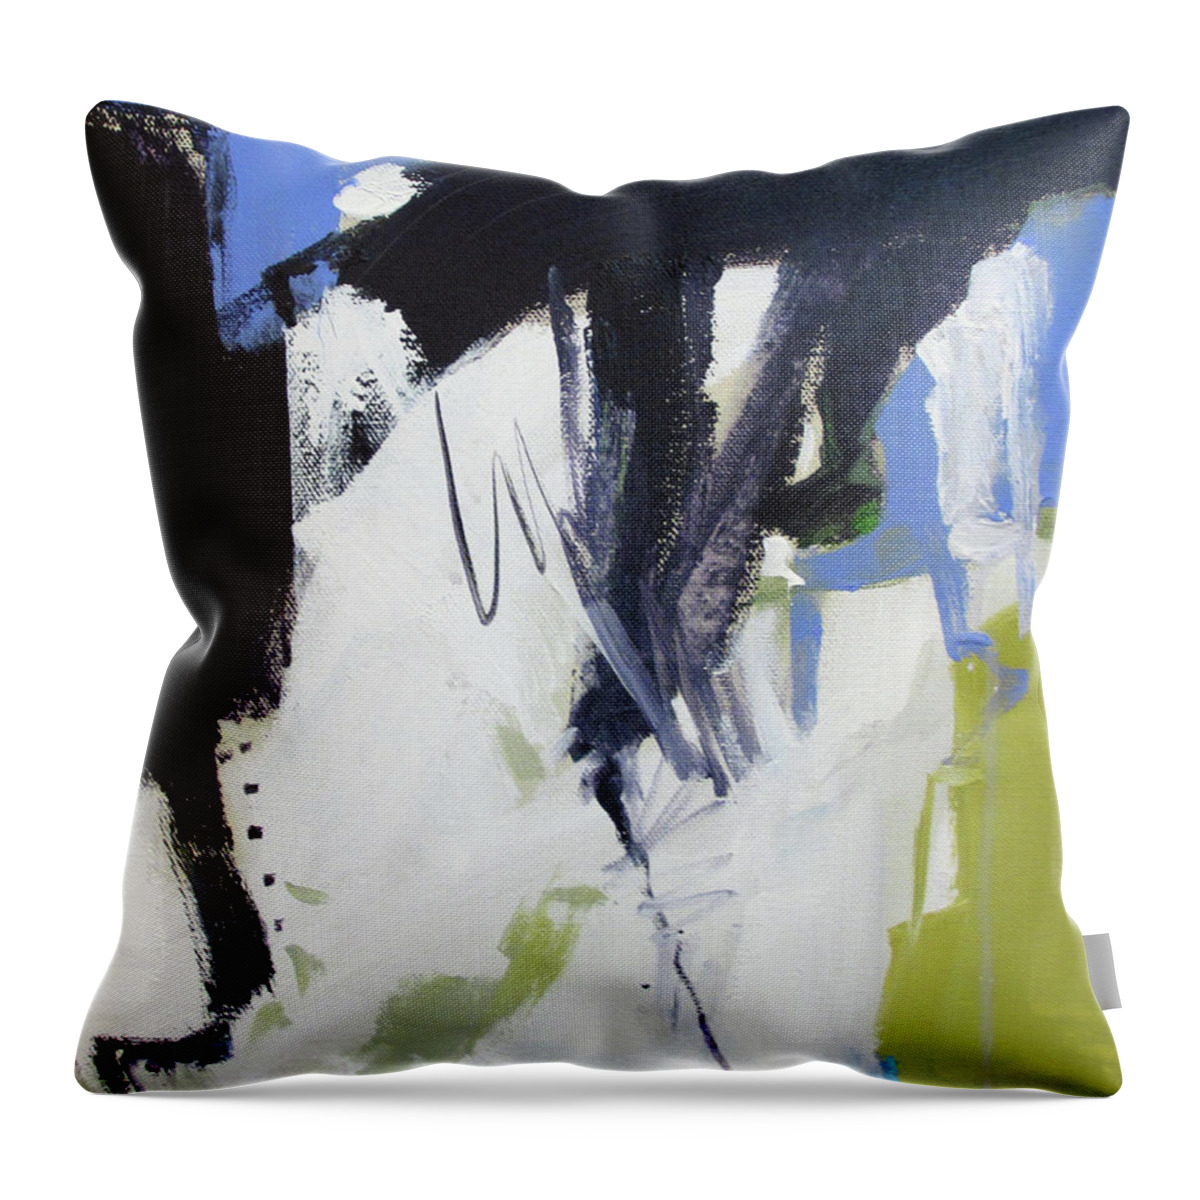 High Tide Throw Pillow featuring the painting High Tide by Chris Gholson